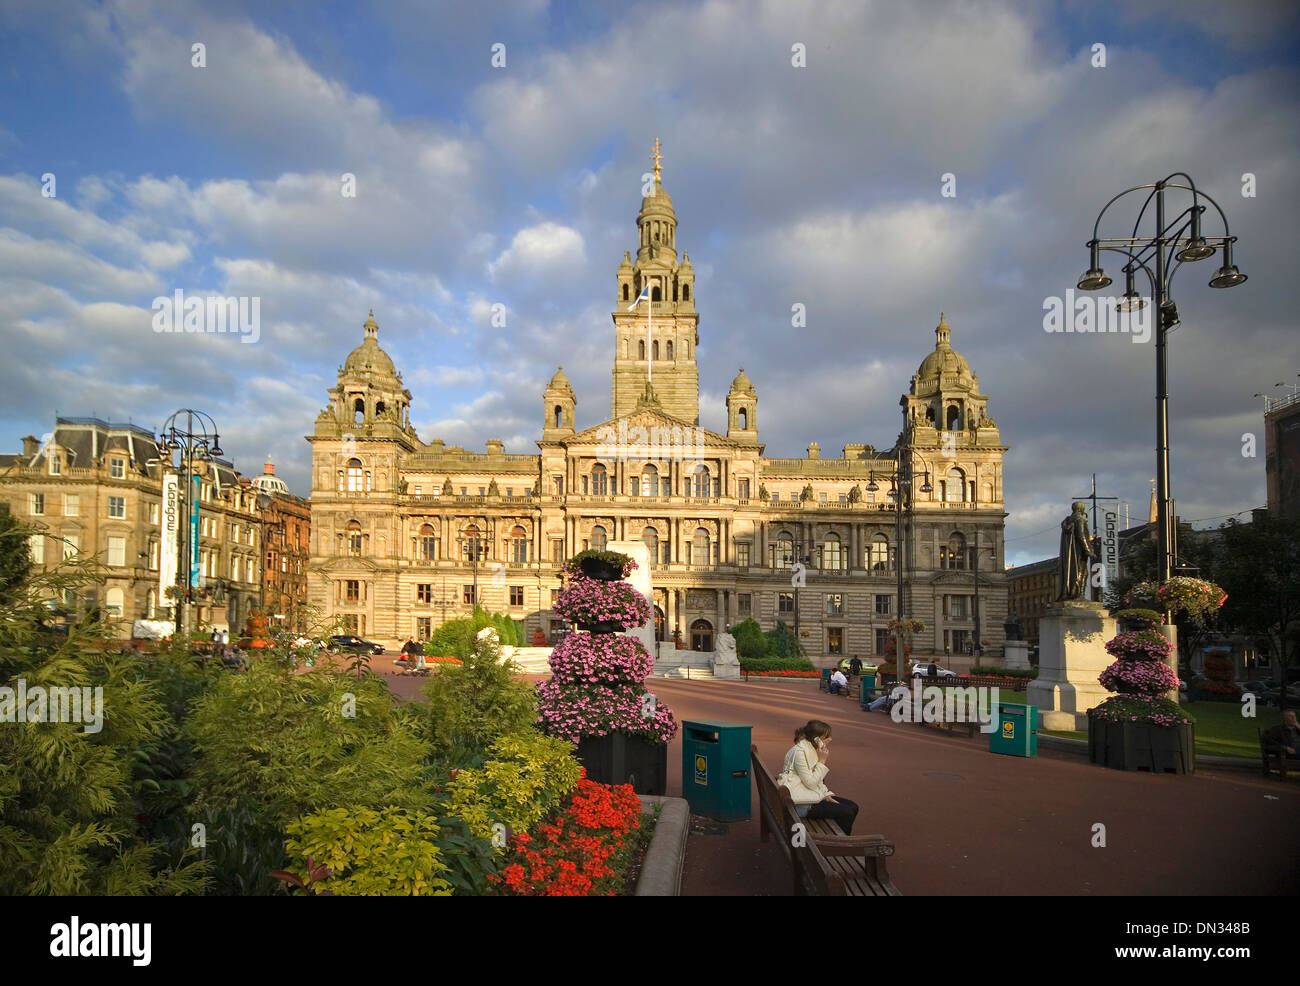 George square Glasgow city chambers Banque D'Images